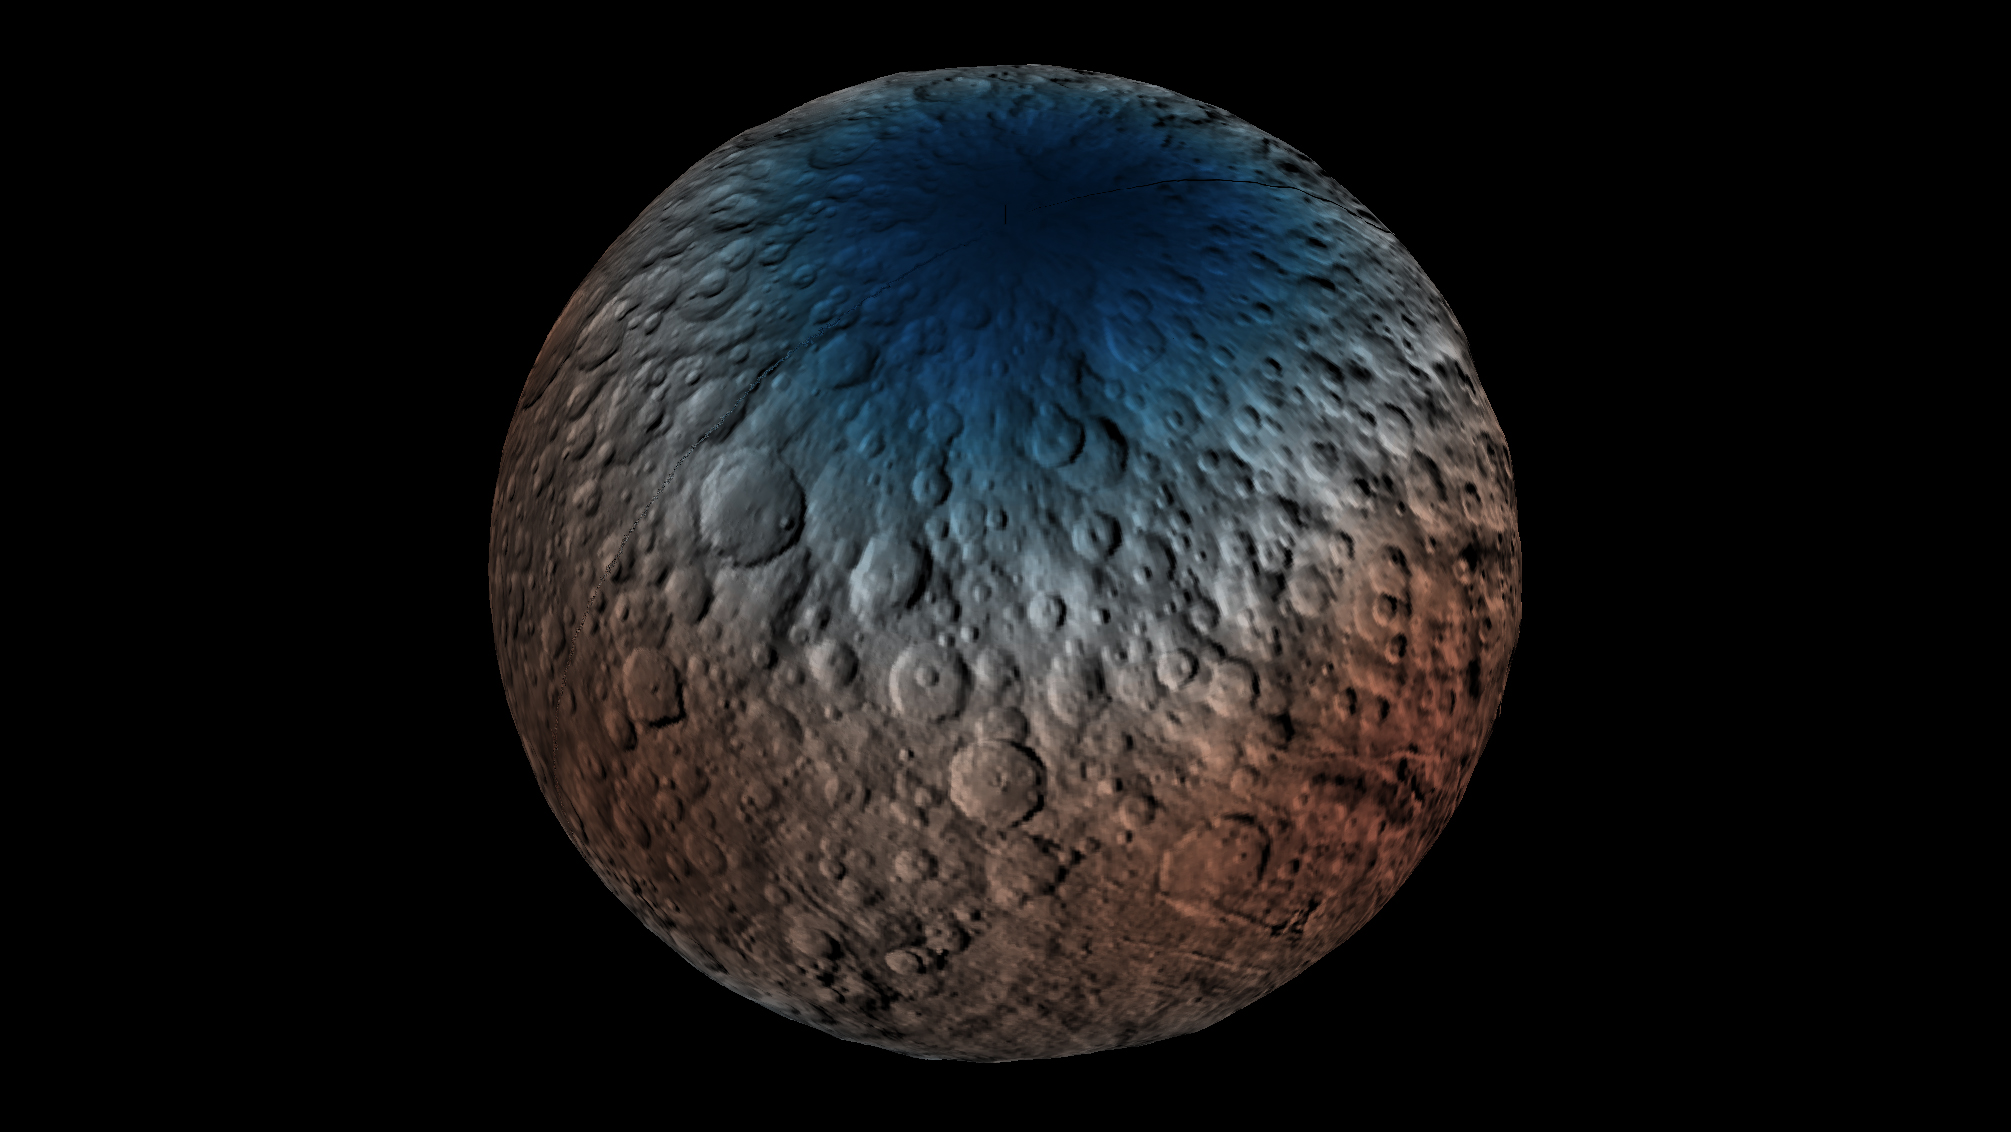 These Are The Most Detailed Images Yet Of The Bright Spots On Ceres